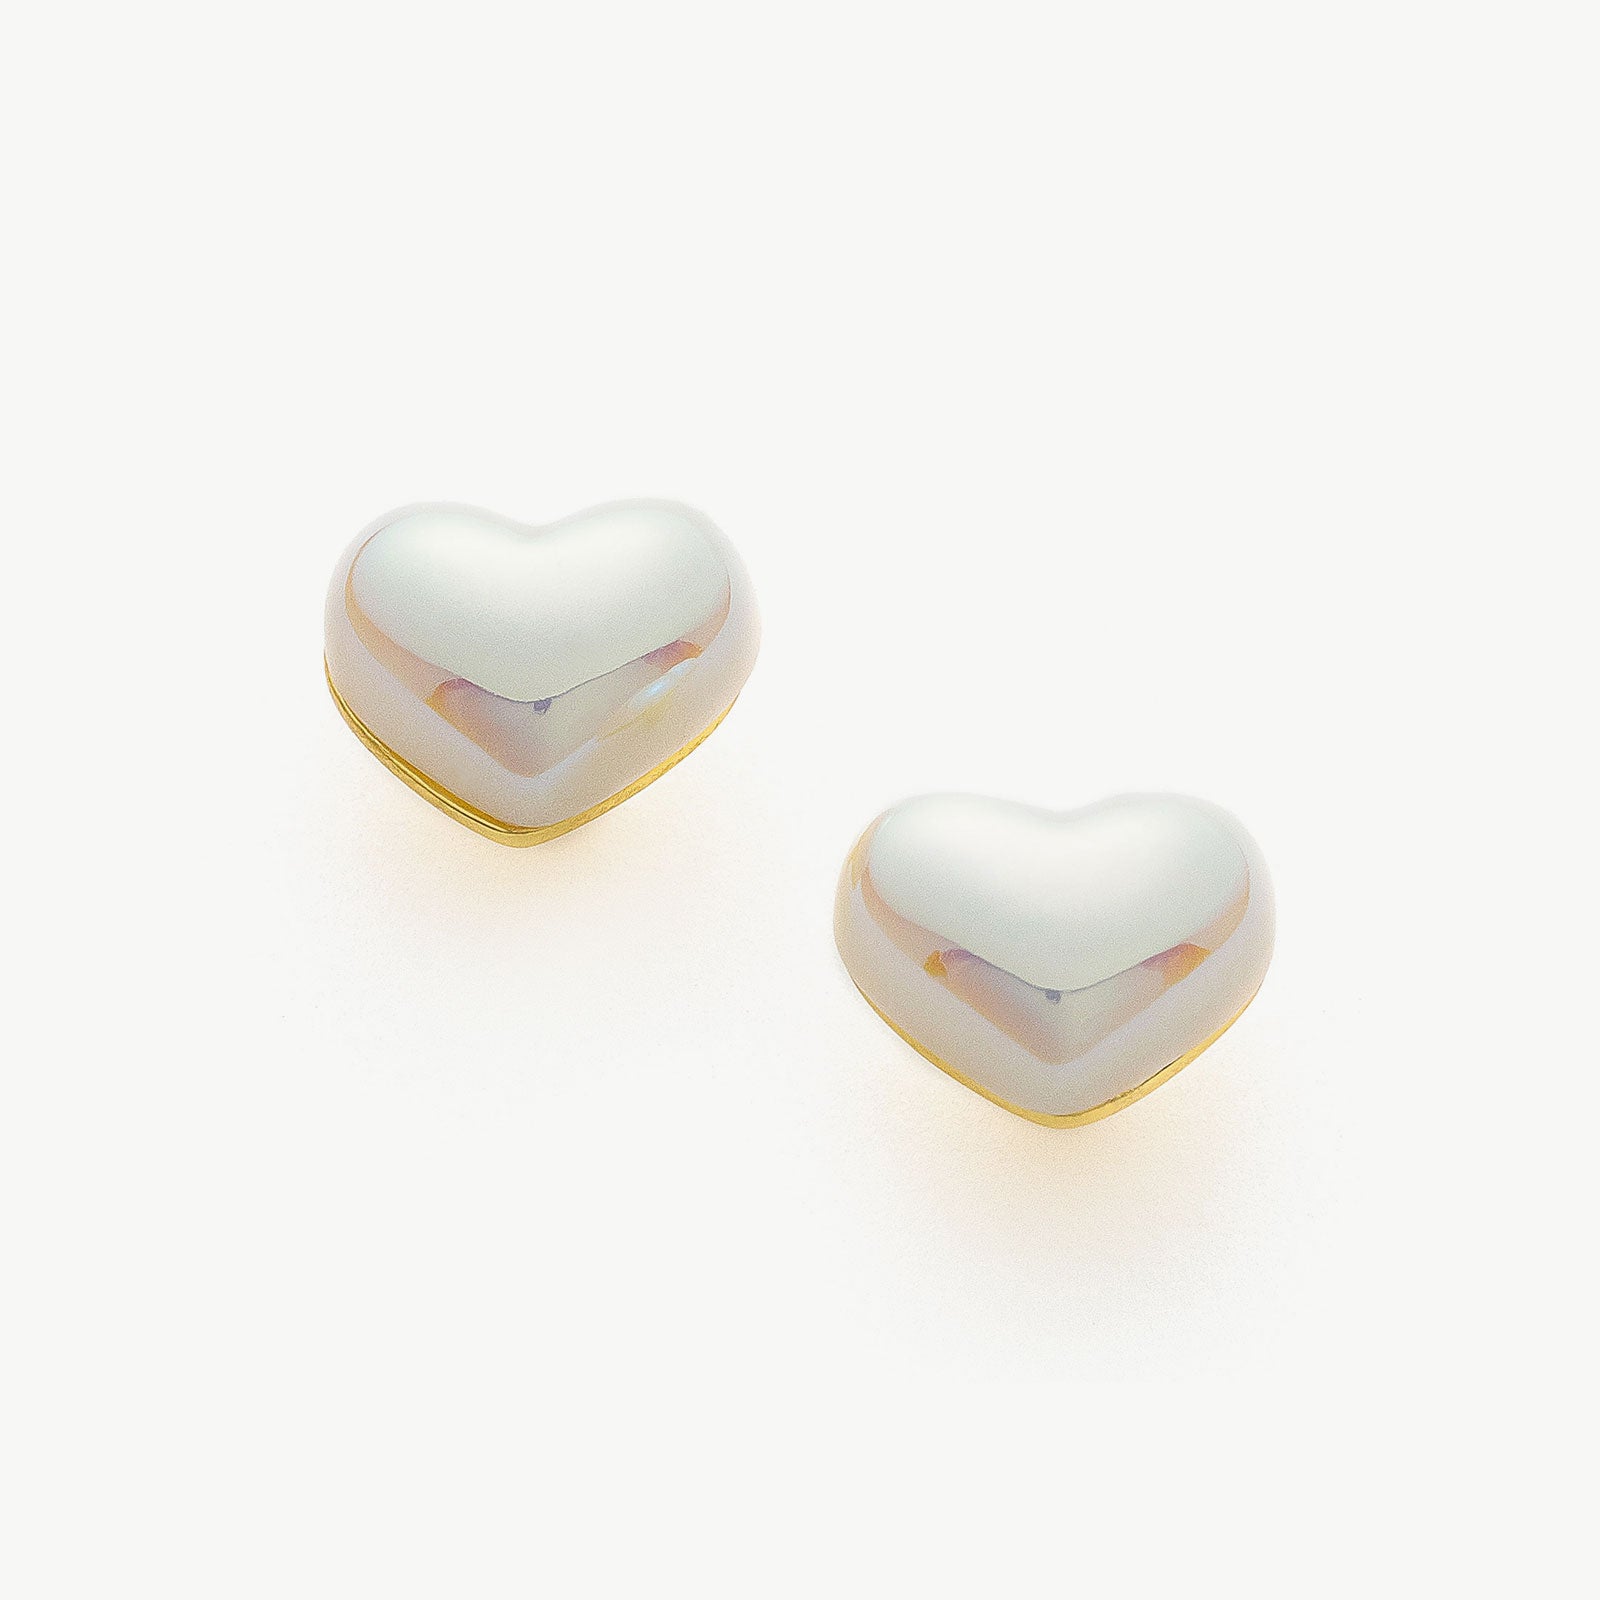  Heart-shaped Stud Earrings, a timeless symbol of love that brings a romantic and classic touch to your ensemble